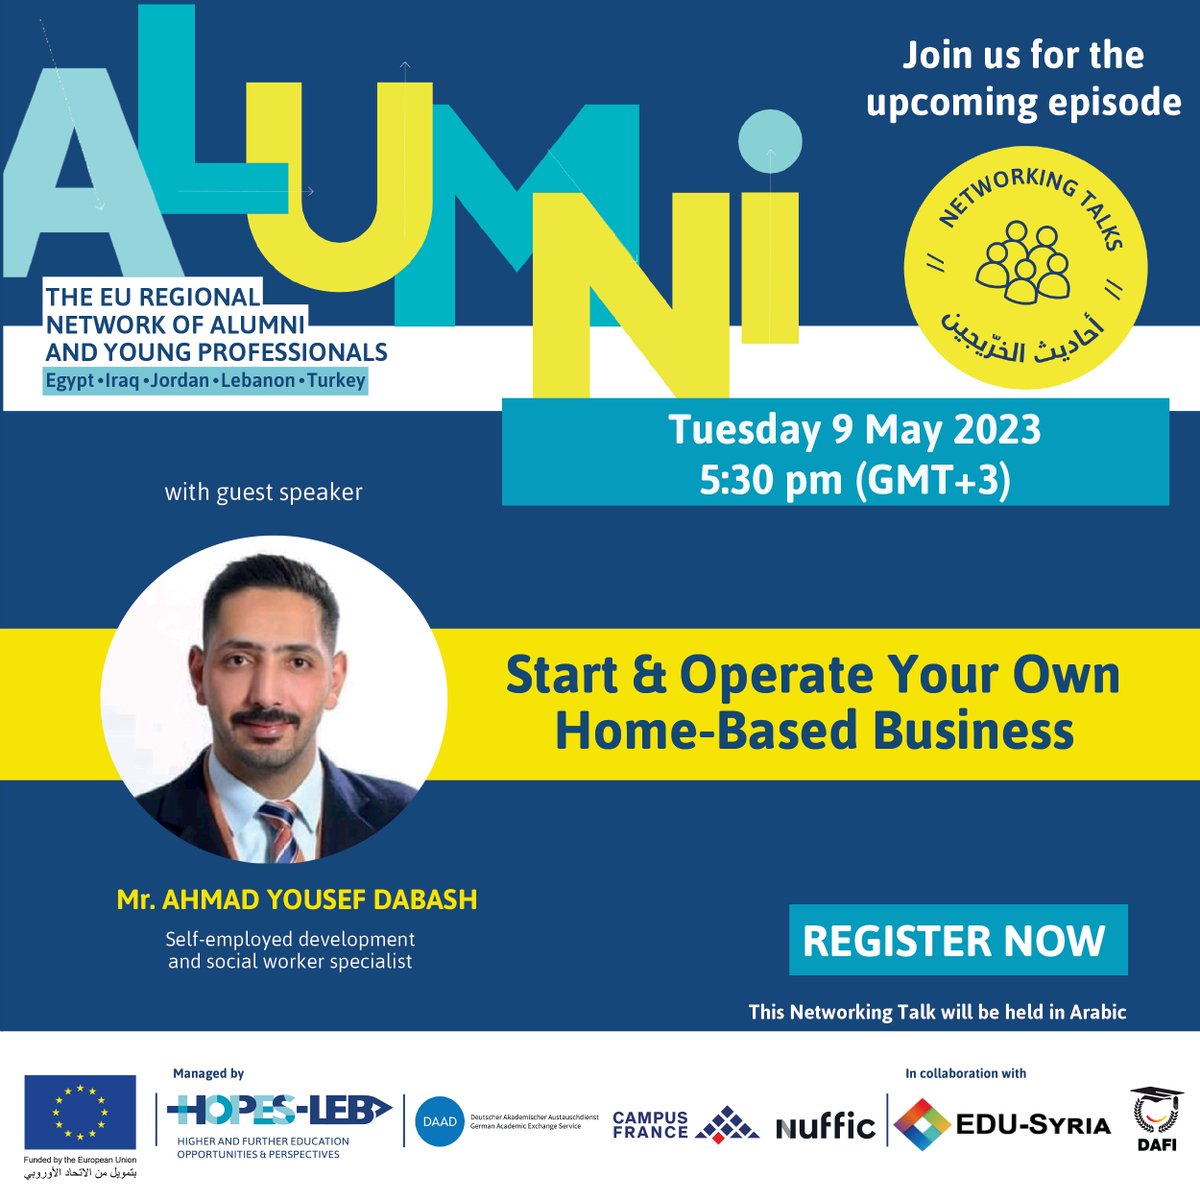 Do you want to start & operate your own home-based business? Join the Networking Talk with the self-employed development and social worker specialist Mr. Ahmad Dabash, on May 9, at 5:30pm (GMT+3). Register now to participate in this mini-workshop for free: framaforms.org/stmr-ltsjyl-fy…